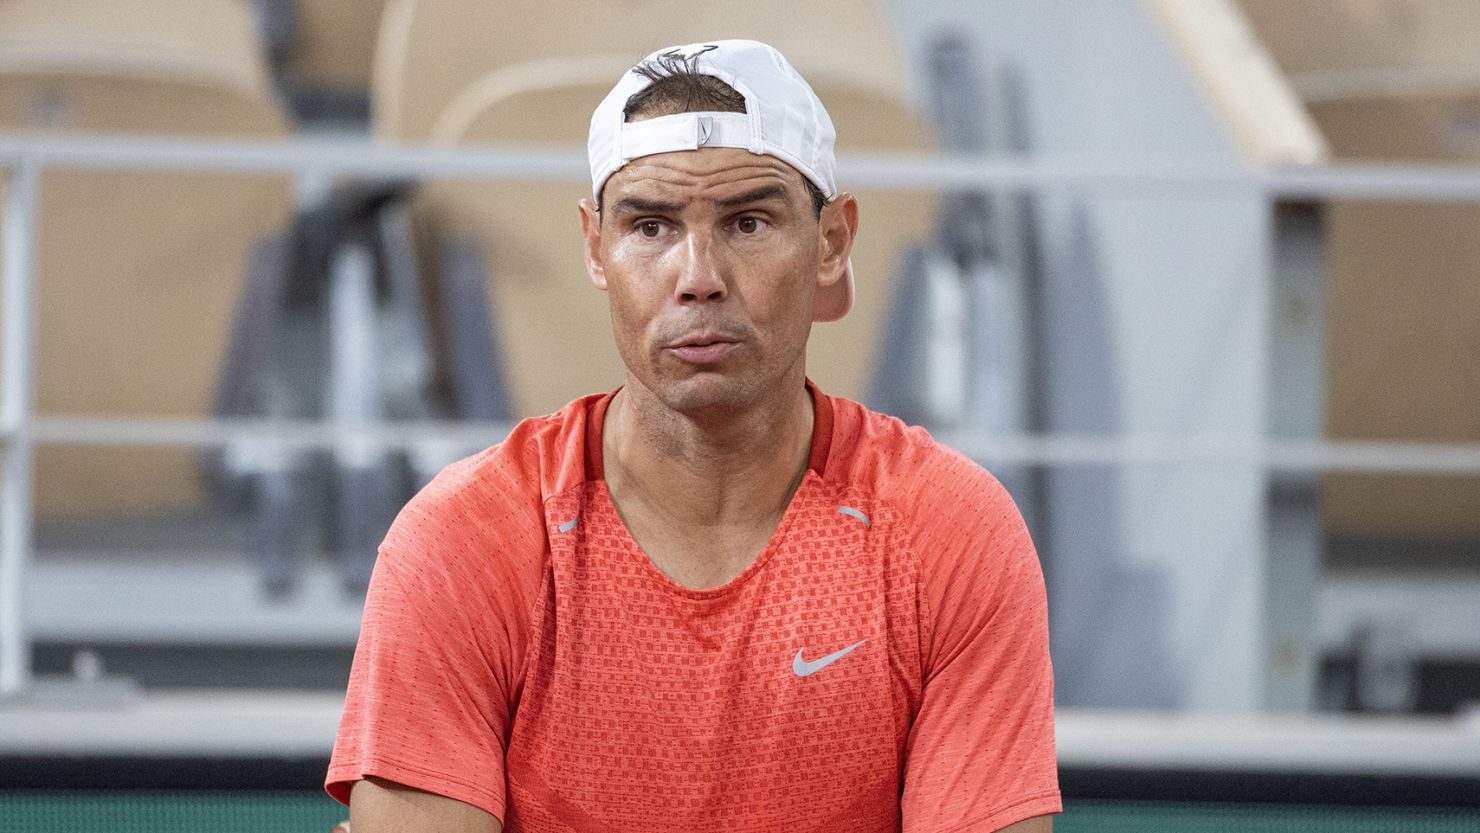 The draw has been made for Rafael Nadal at the French Open. It couldn't have gone much worse for the Spaniard | CNN